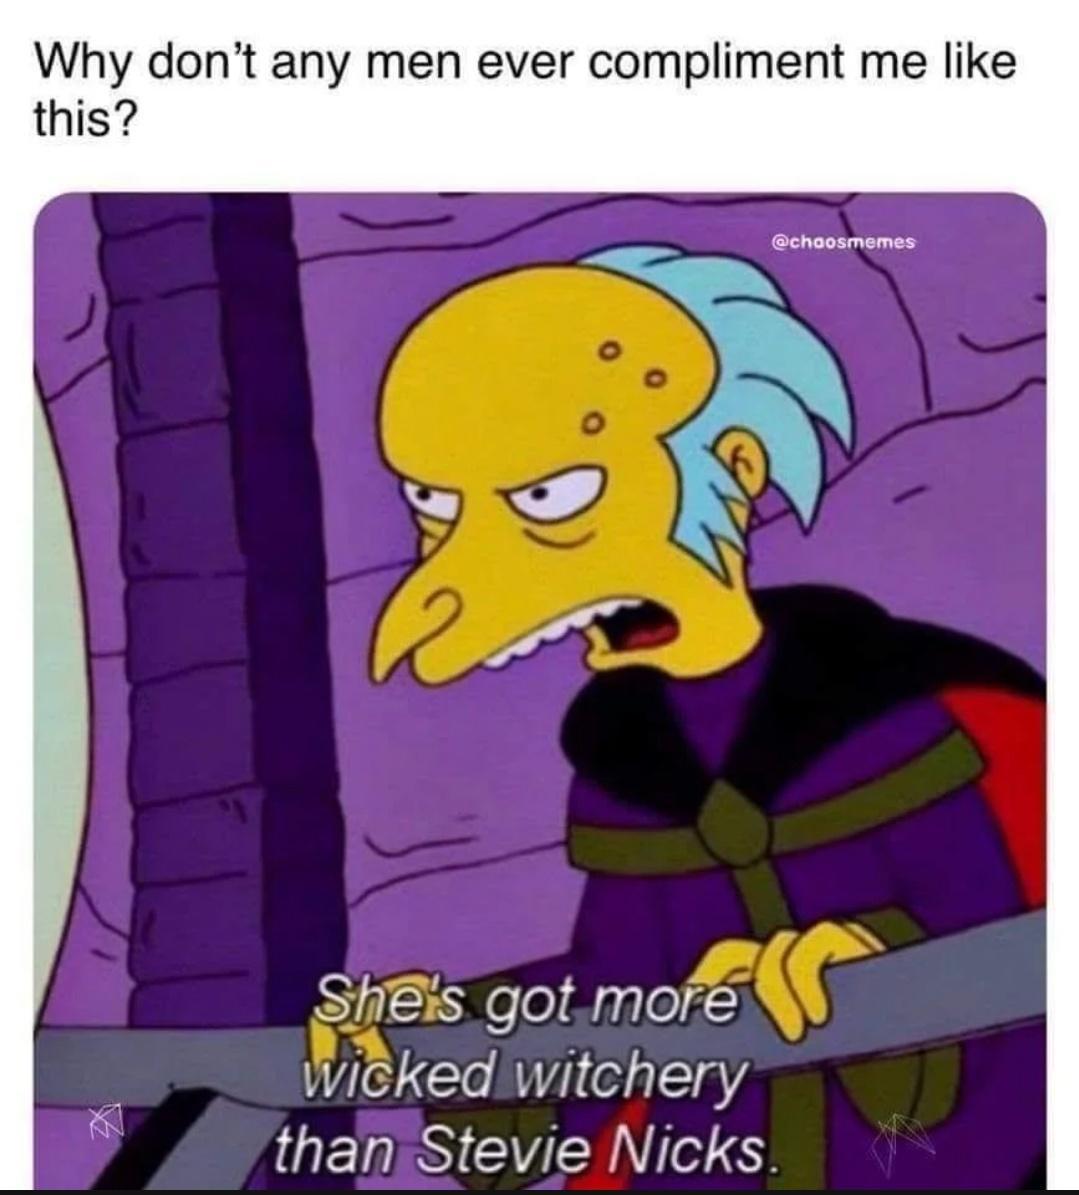 funny memes and pics - cartoon - Why don't any men ever compliment me this? She's got more wicked witchery than Stevie Nicks.